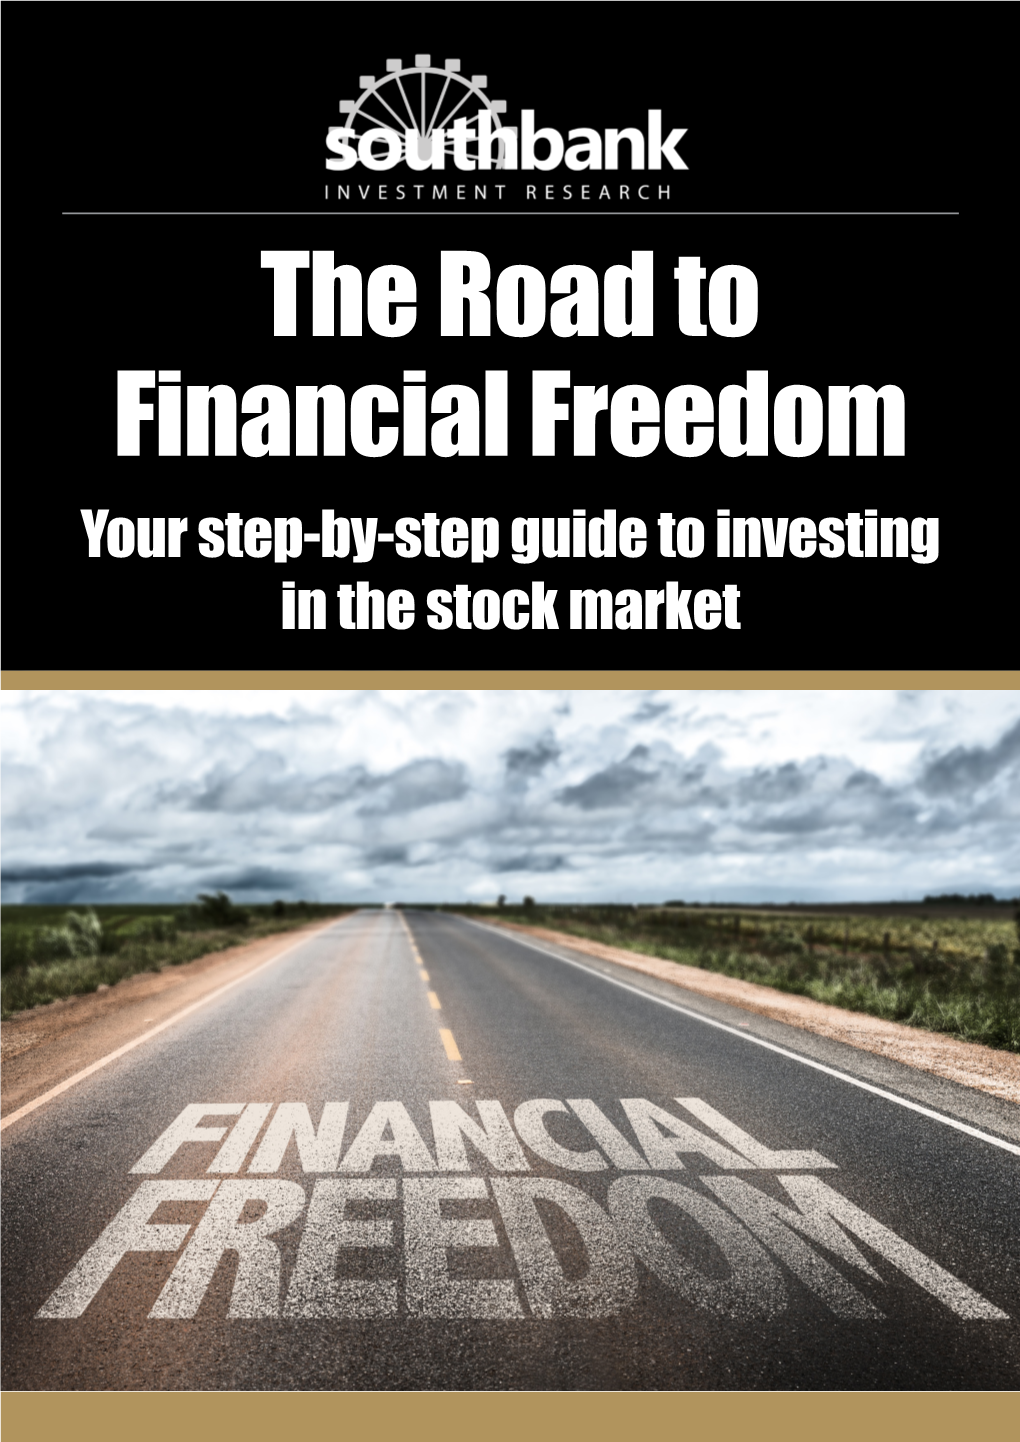 The Road to Financial Freedom Your Step-By-Step Guide to Investing in the Stock Market — a SOUTHBANK INVESTMENT RESEARCH REPORT —